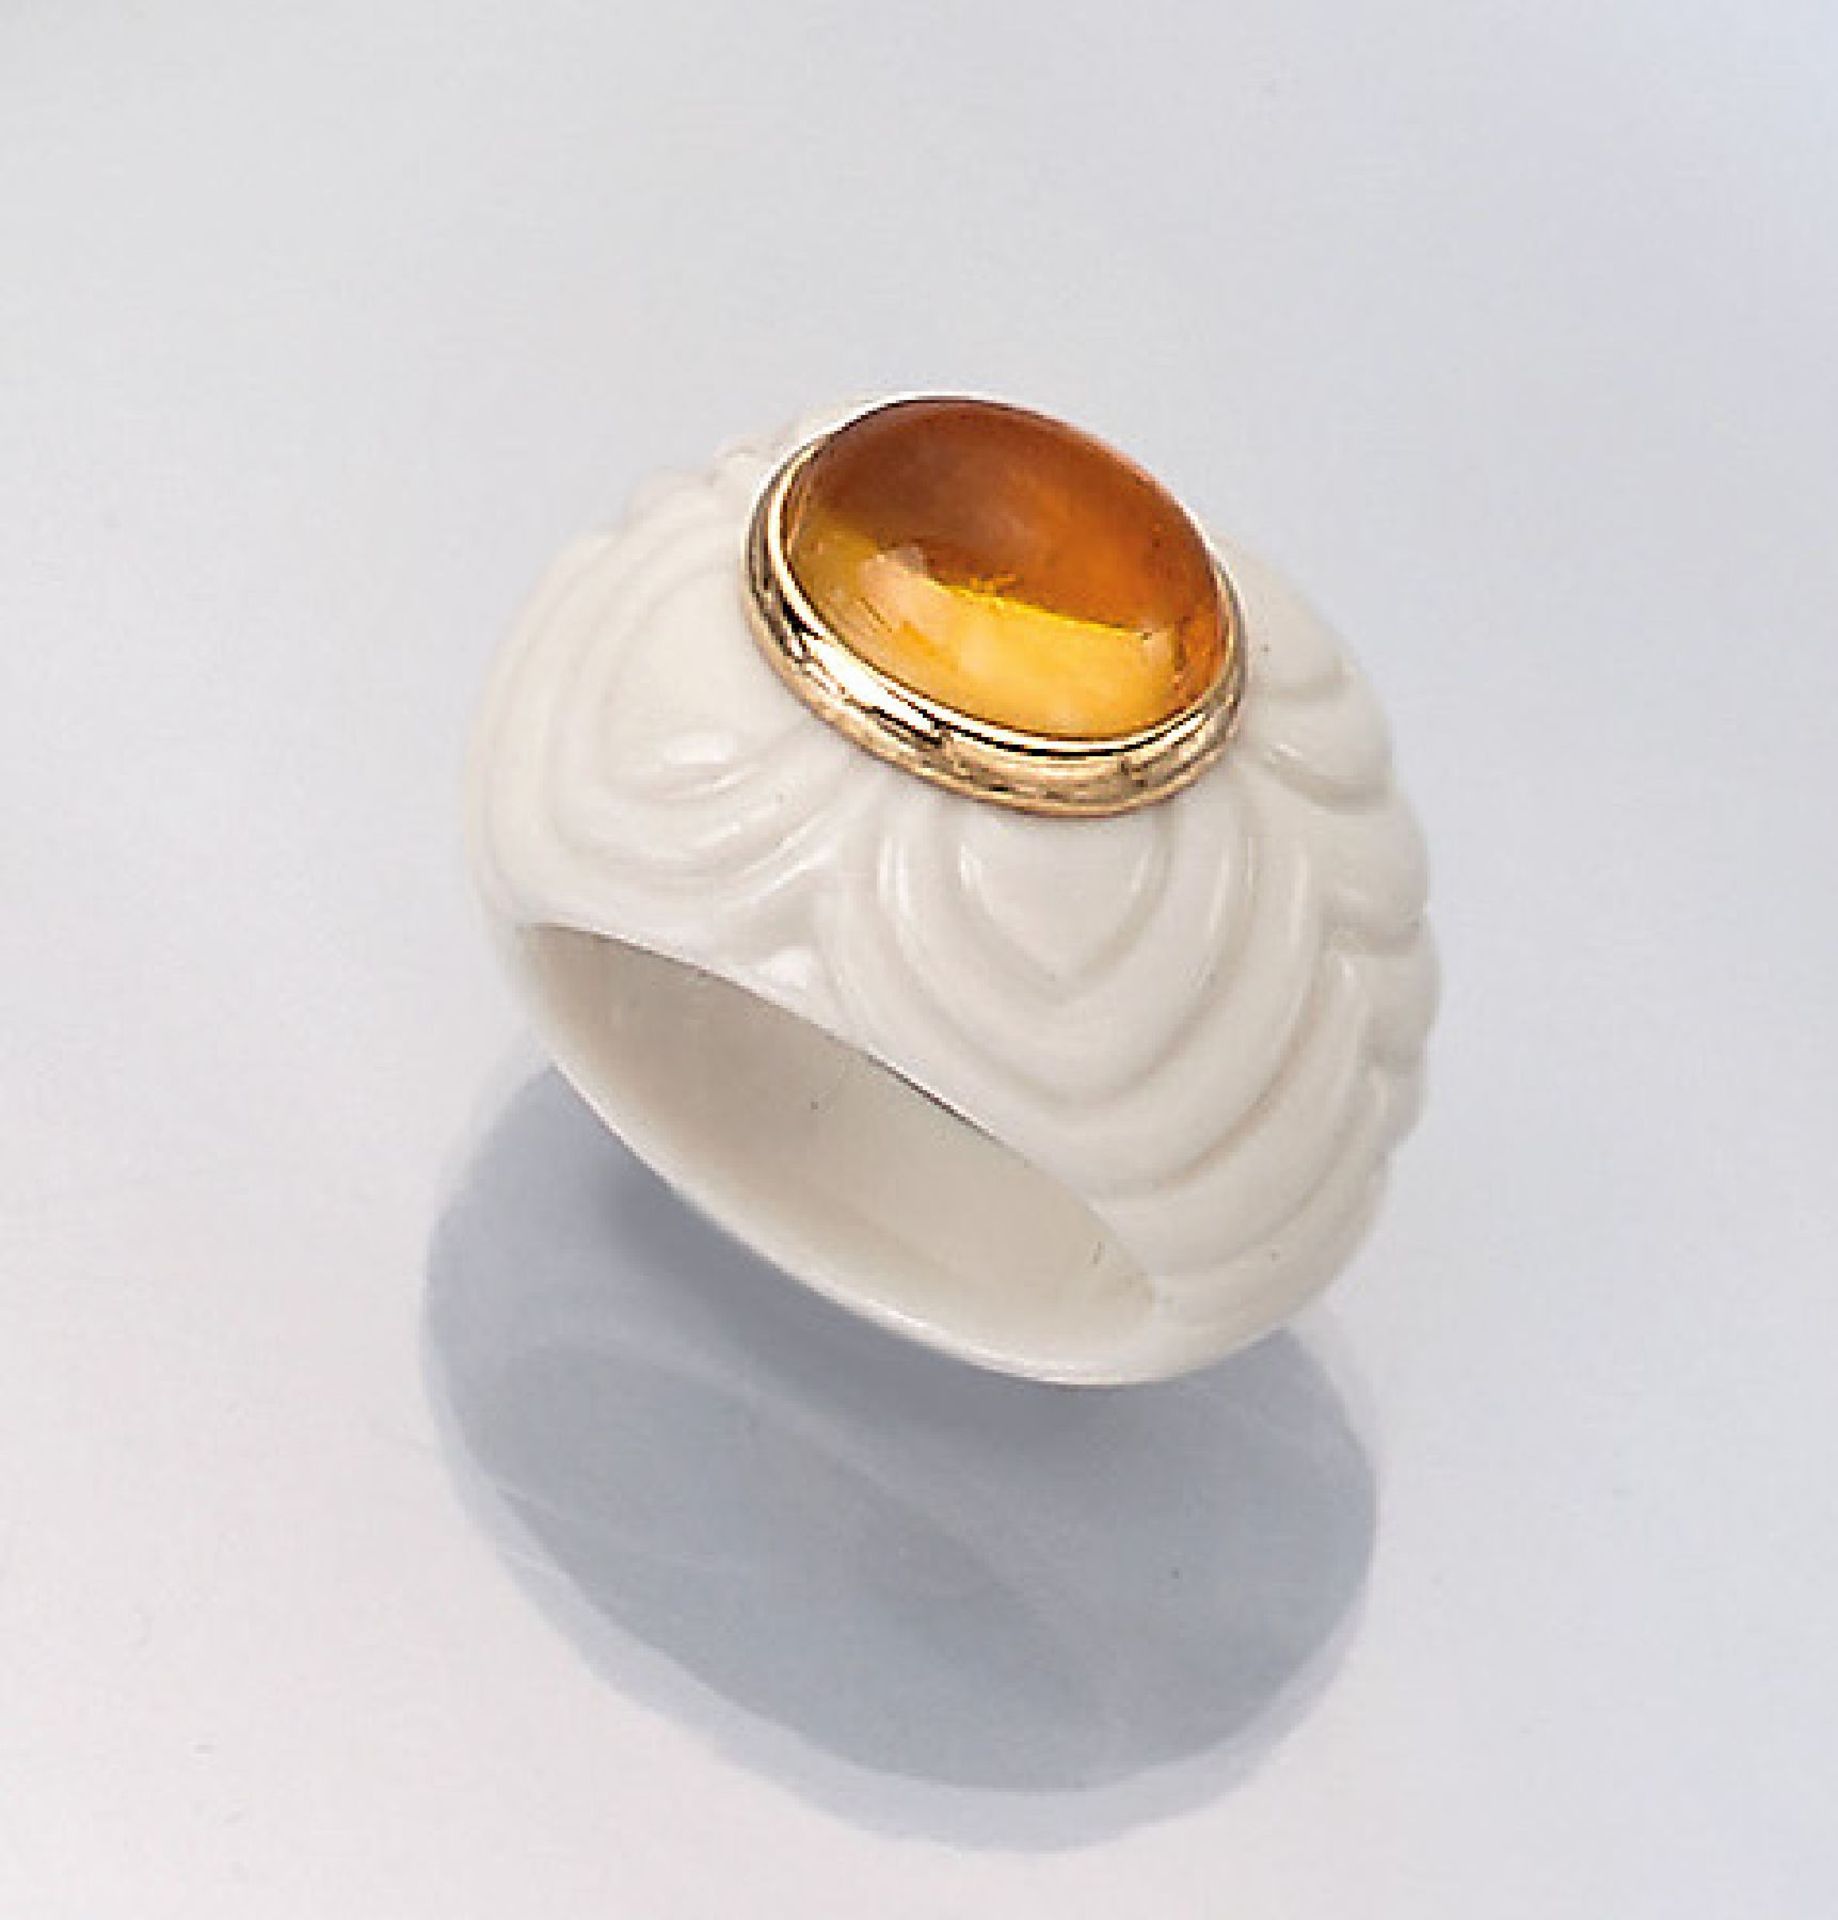 BULGARI ring with citrine , white ceramic with floral engraving, centered oval citrine cabochon